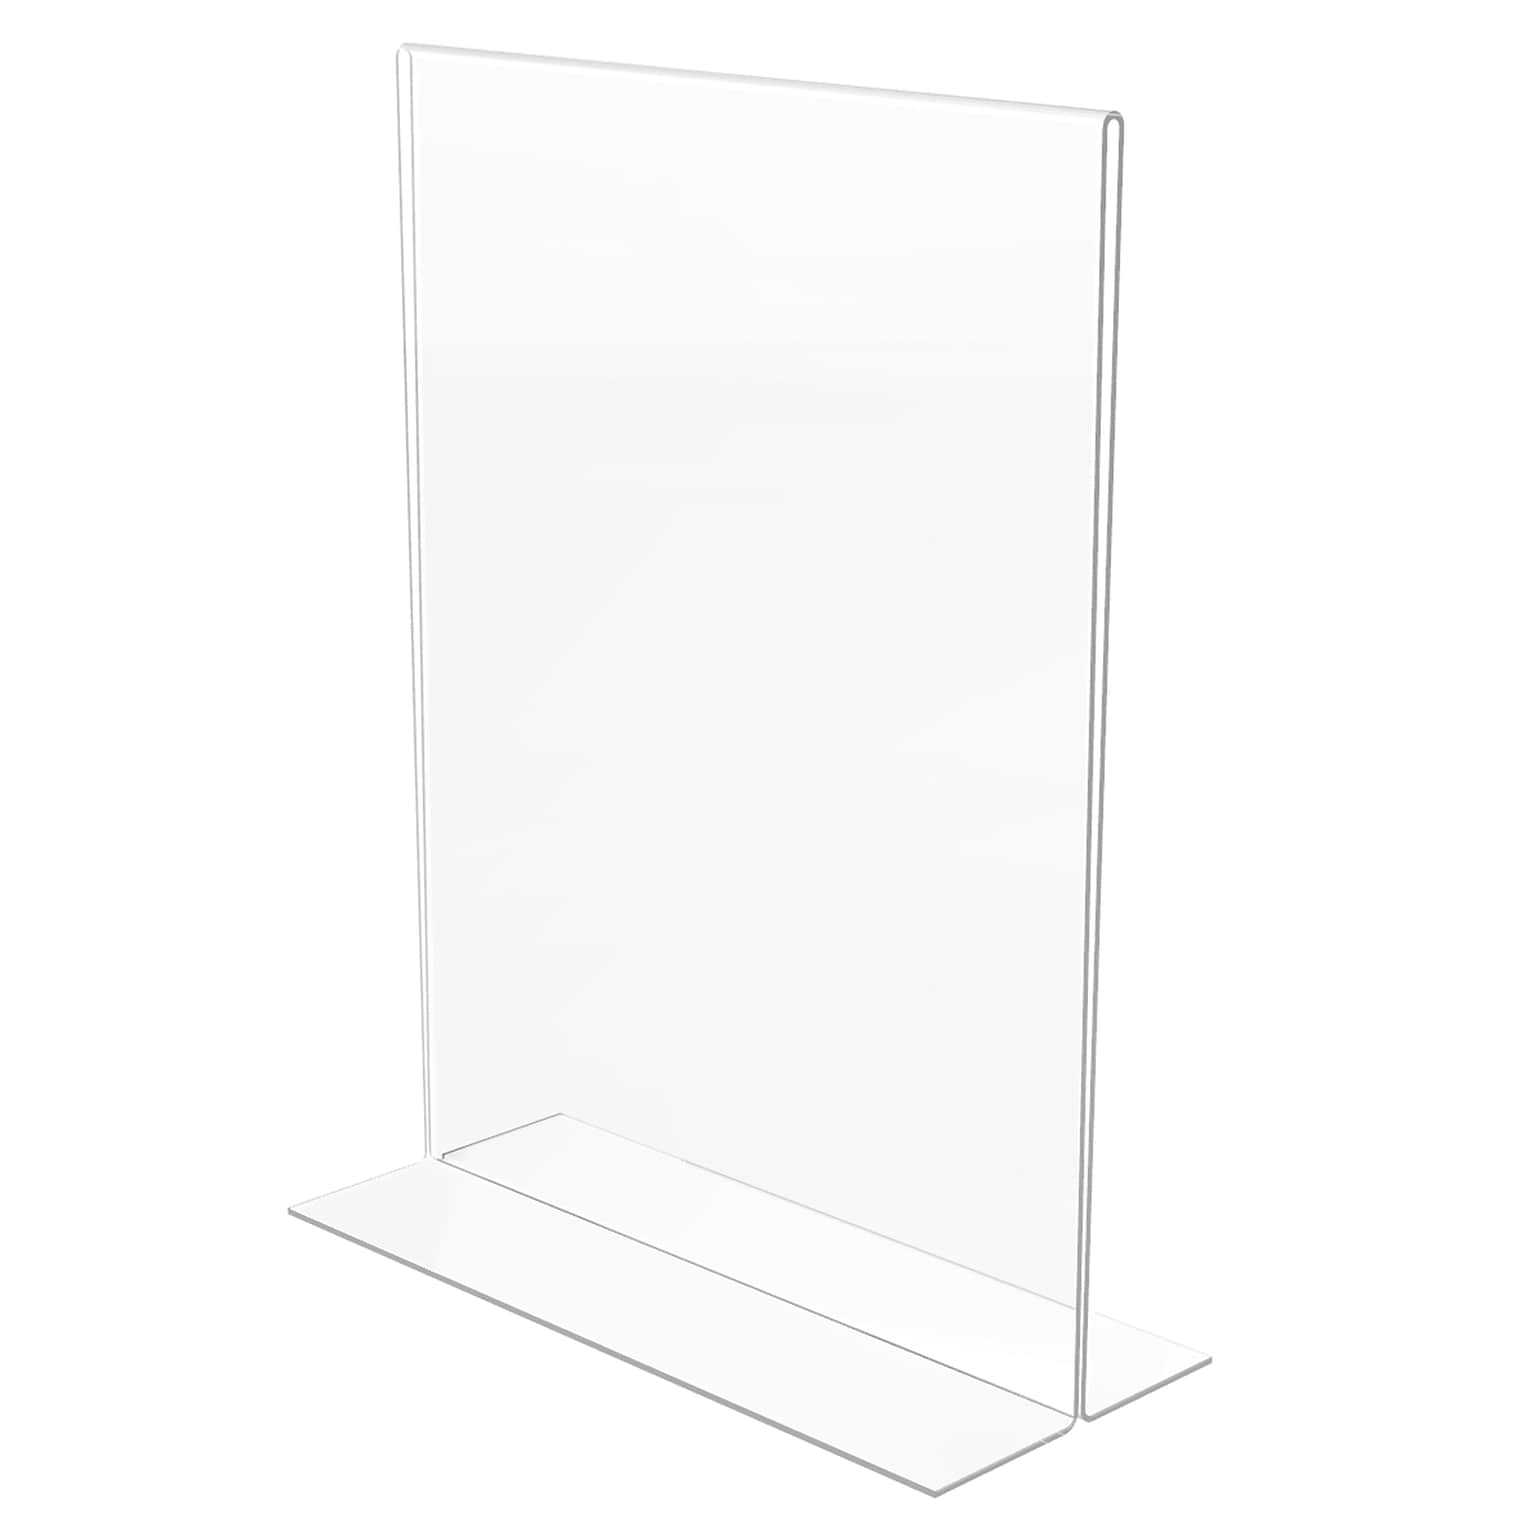 Deflecto Classic Image Double-Sided Sign Holder, 8.5 x 11, Clear Plastic (69201)